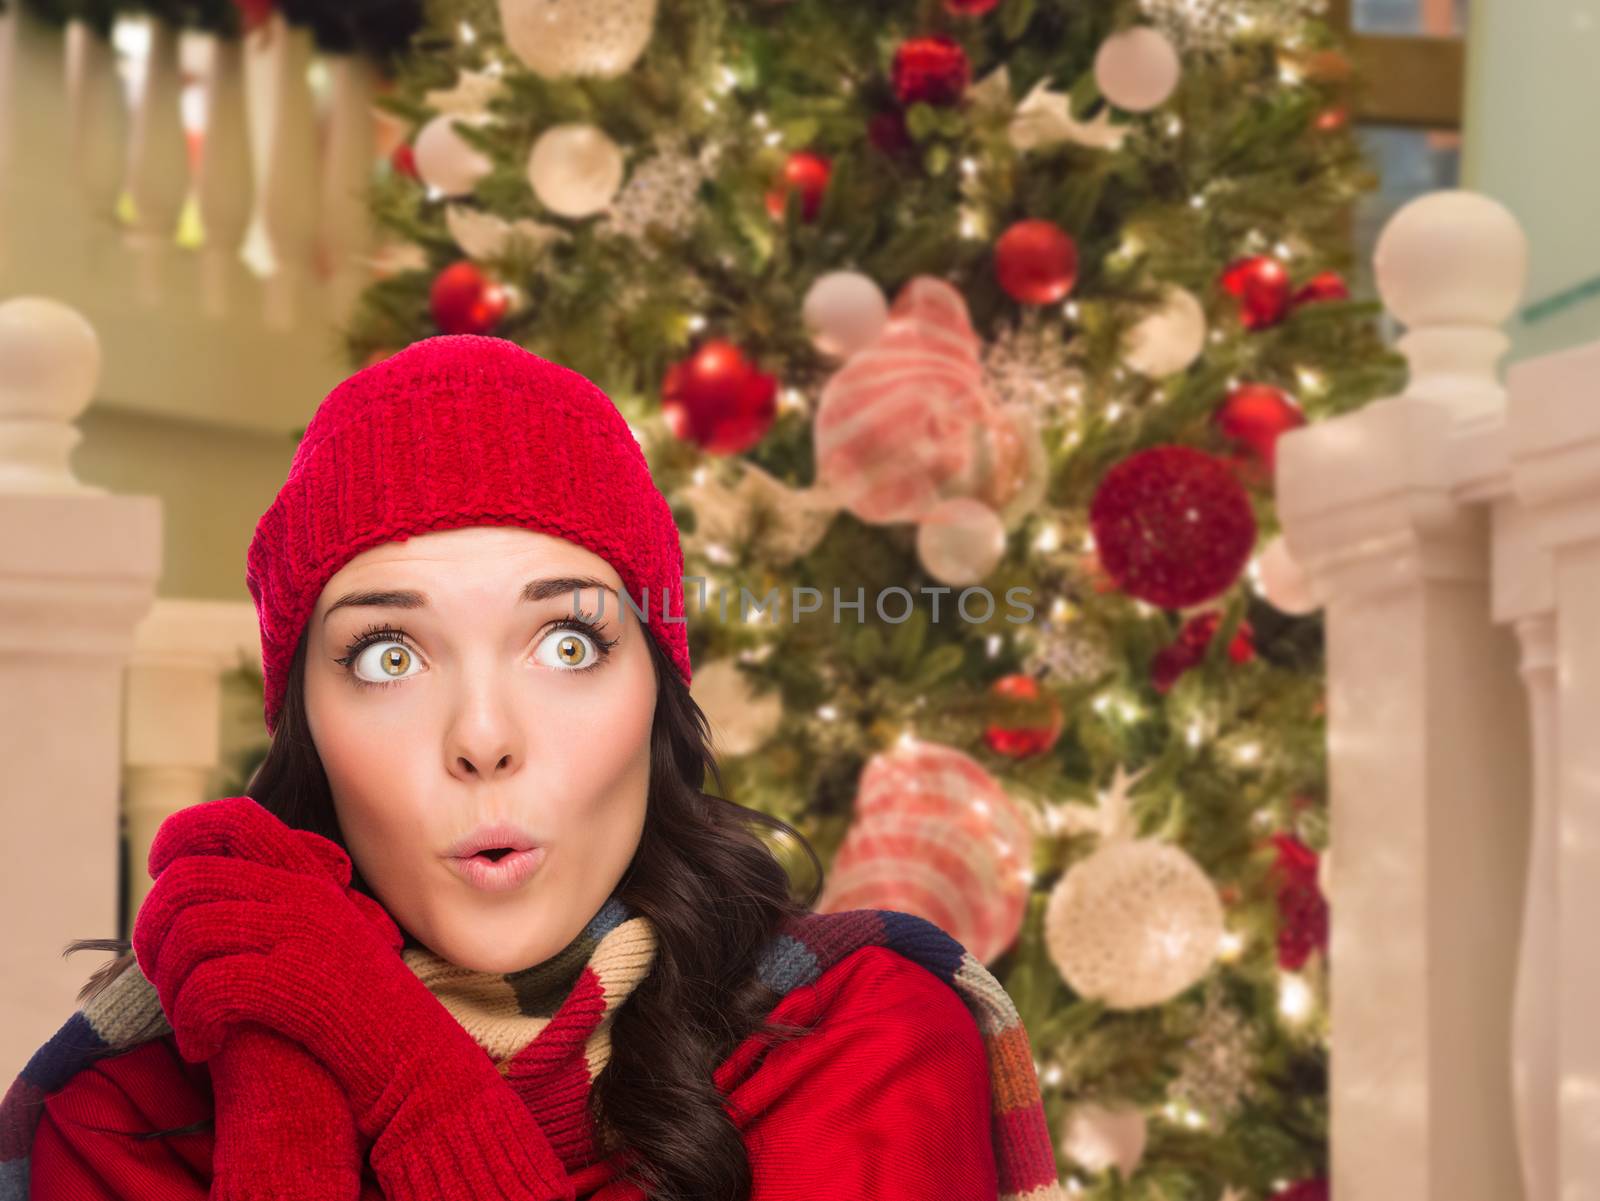 Warmly Dressed Female In Front of Decorated Christmas Tree. by Feverpitched